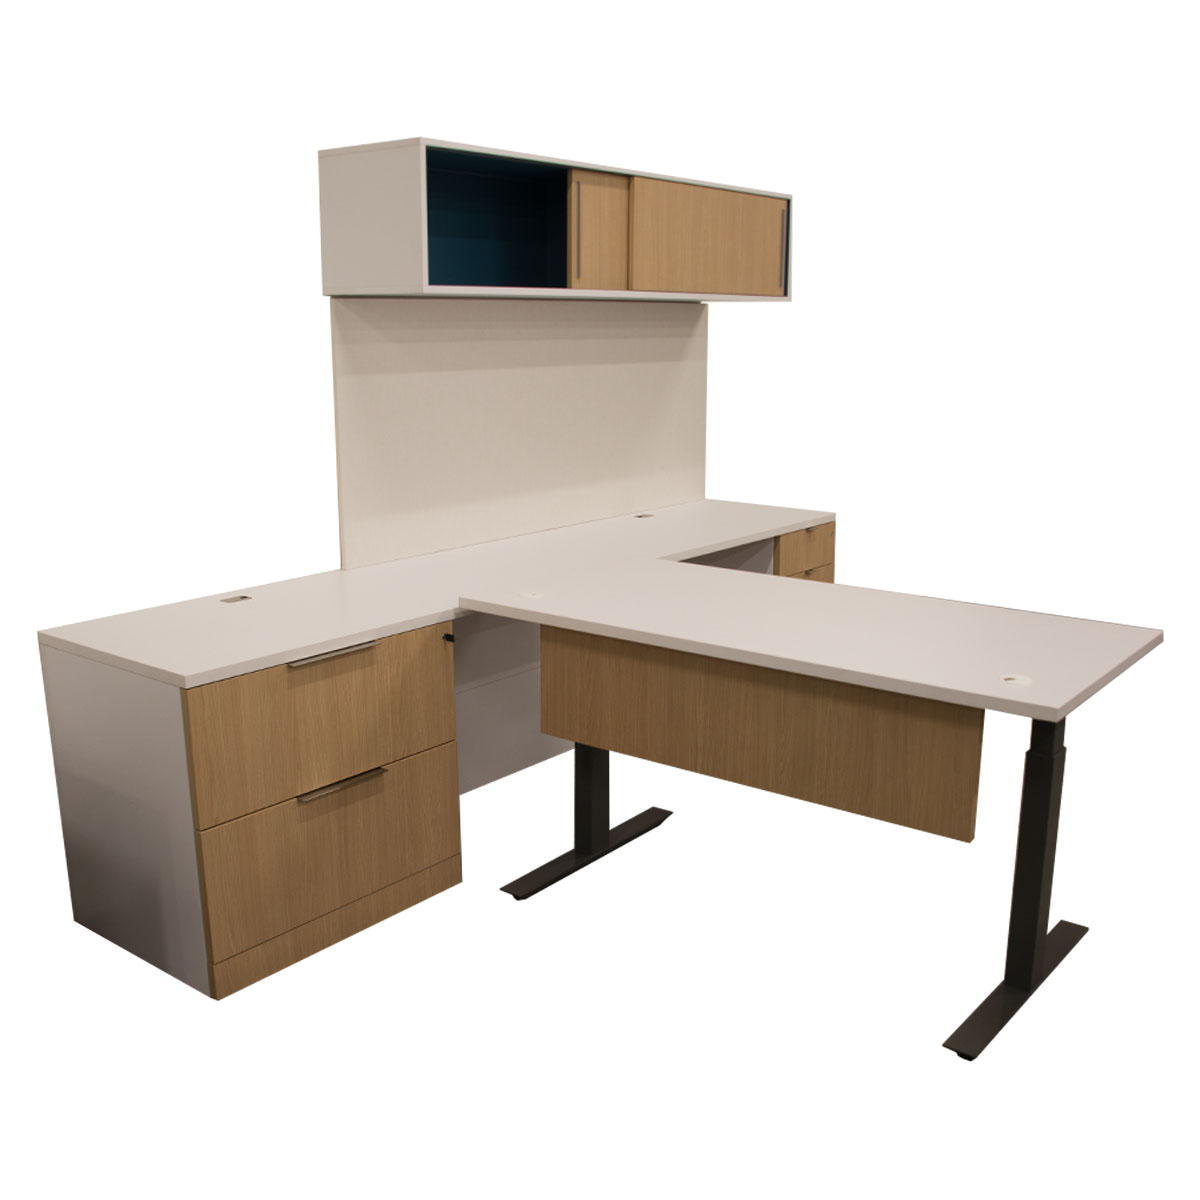 Steelcase C-Scape Station W/ Two Drawer Lateral File desk